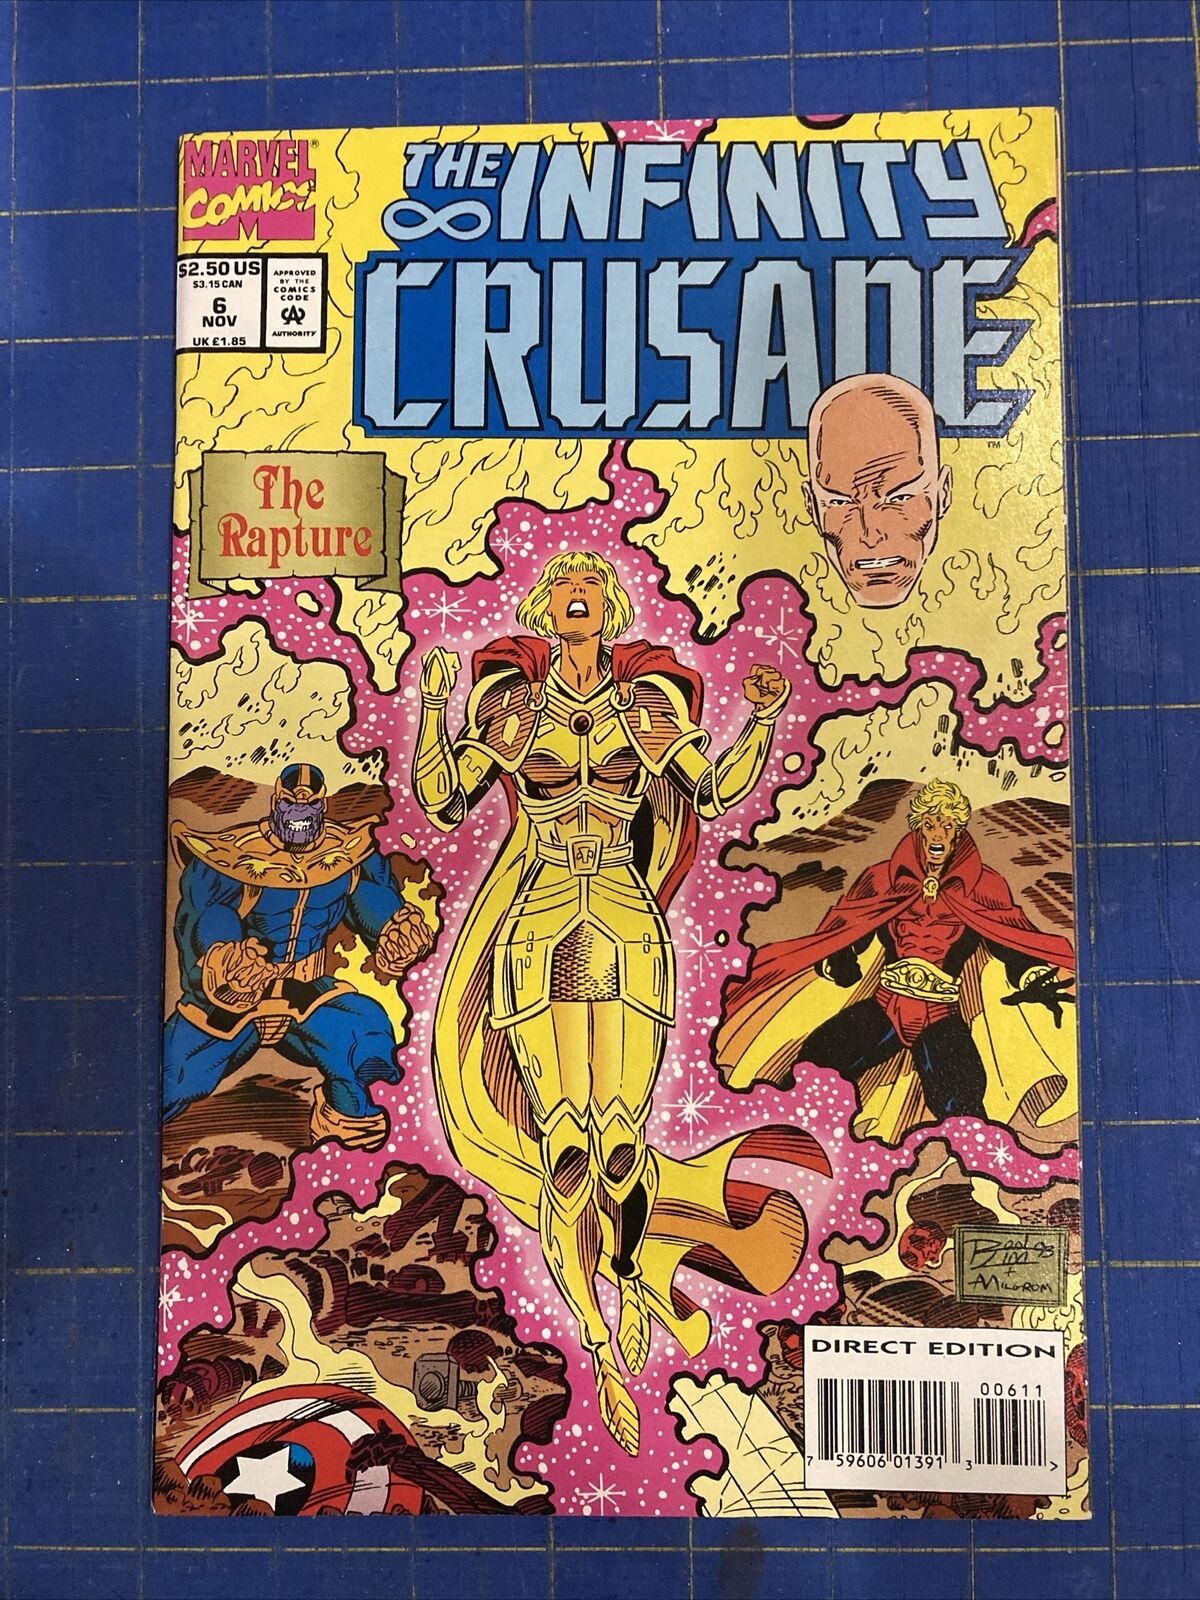 Infinity Crusade Issue 6 Marvel Comic Book FN-